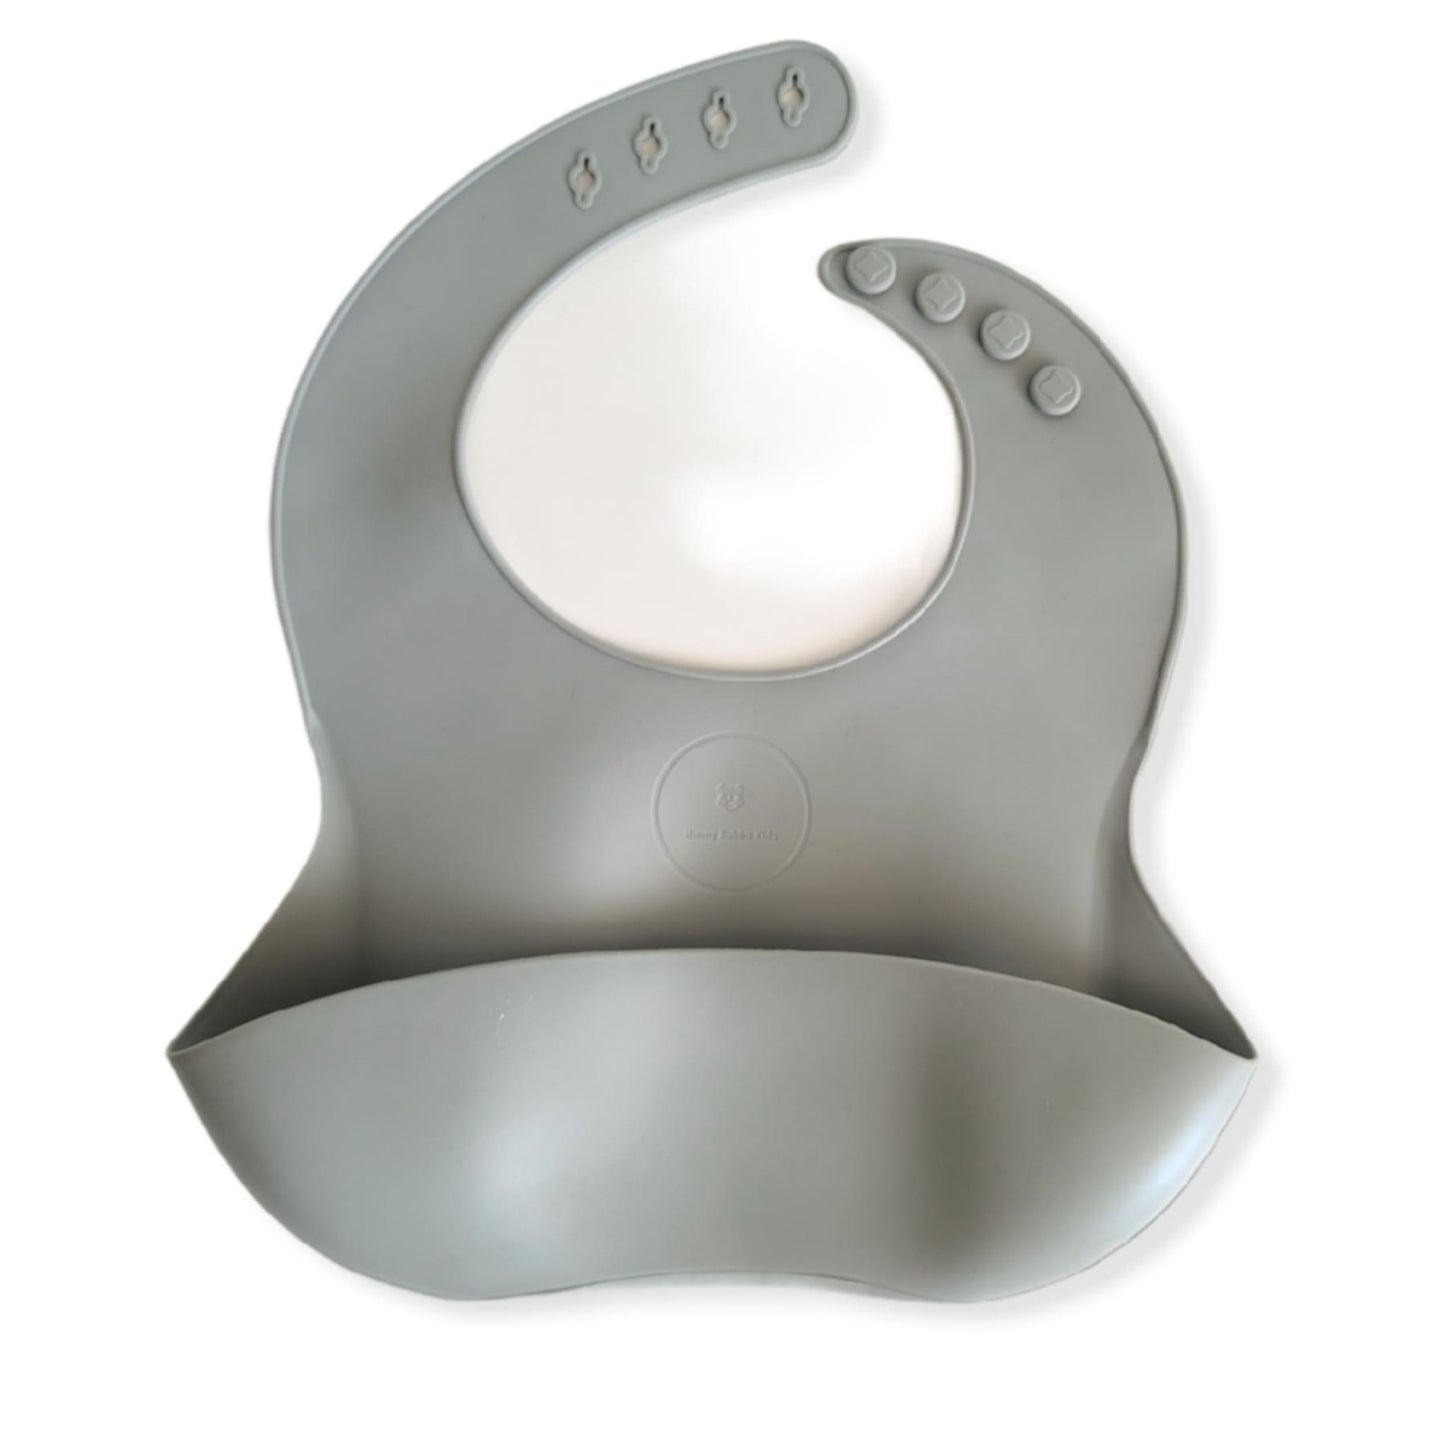 grey baby bib for babies made of fda silicone 